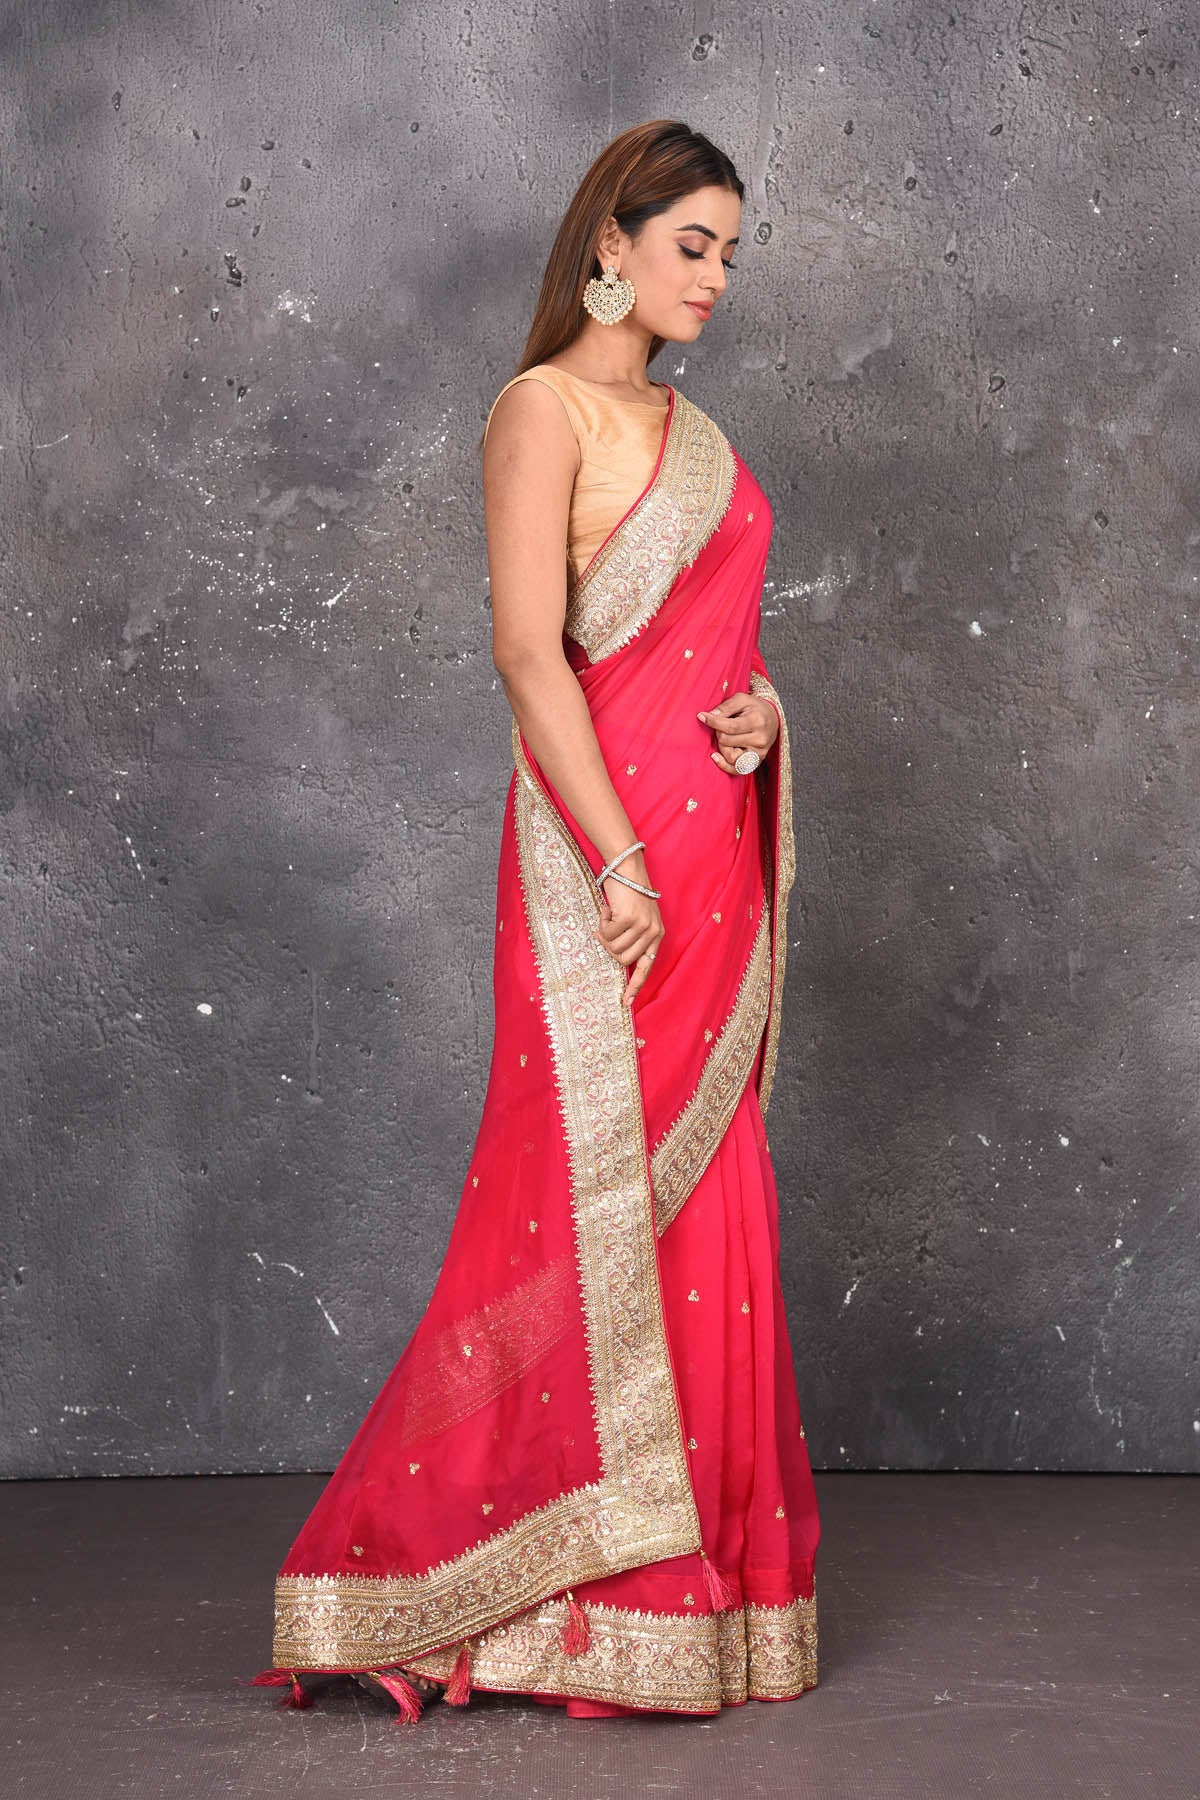 Shop exquisite pink georgette banarasi designer saree with golden heavy Border online in USA which has crafted by skilled weaver of Banaras with elegance and grace, this saree is definitely the epitome of beauty and a must have in your collection. Buy designer handwoven banarasi georgette sari with any blouse from Pure Elegance Indian saree store in USA.-Side view.